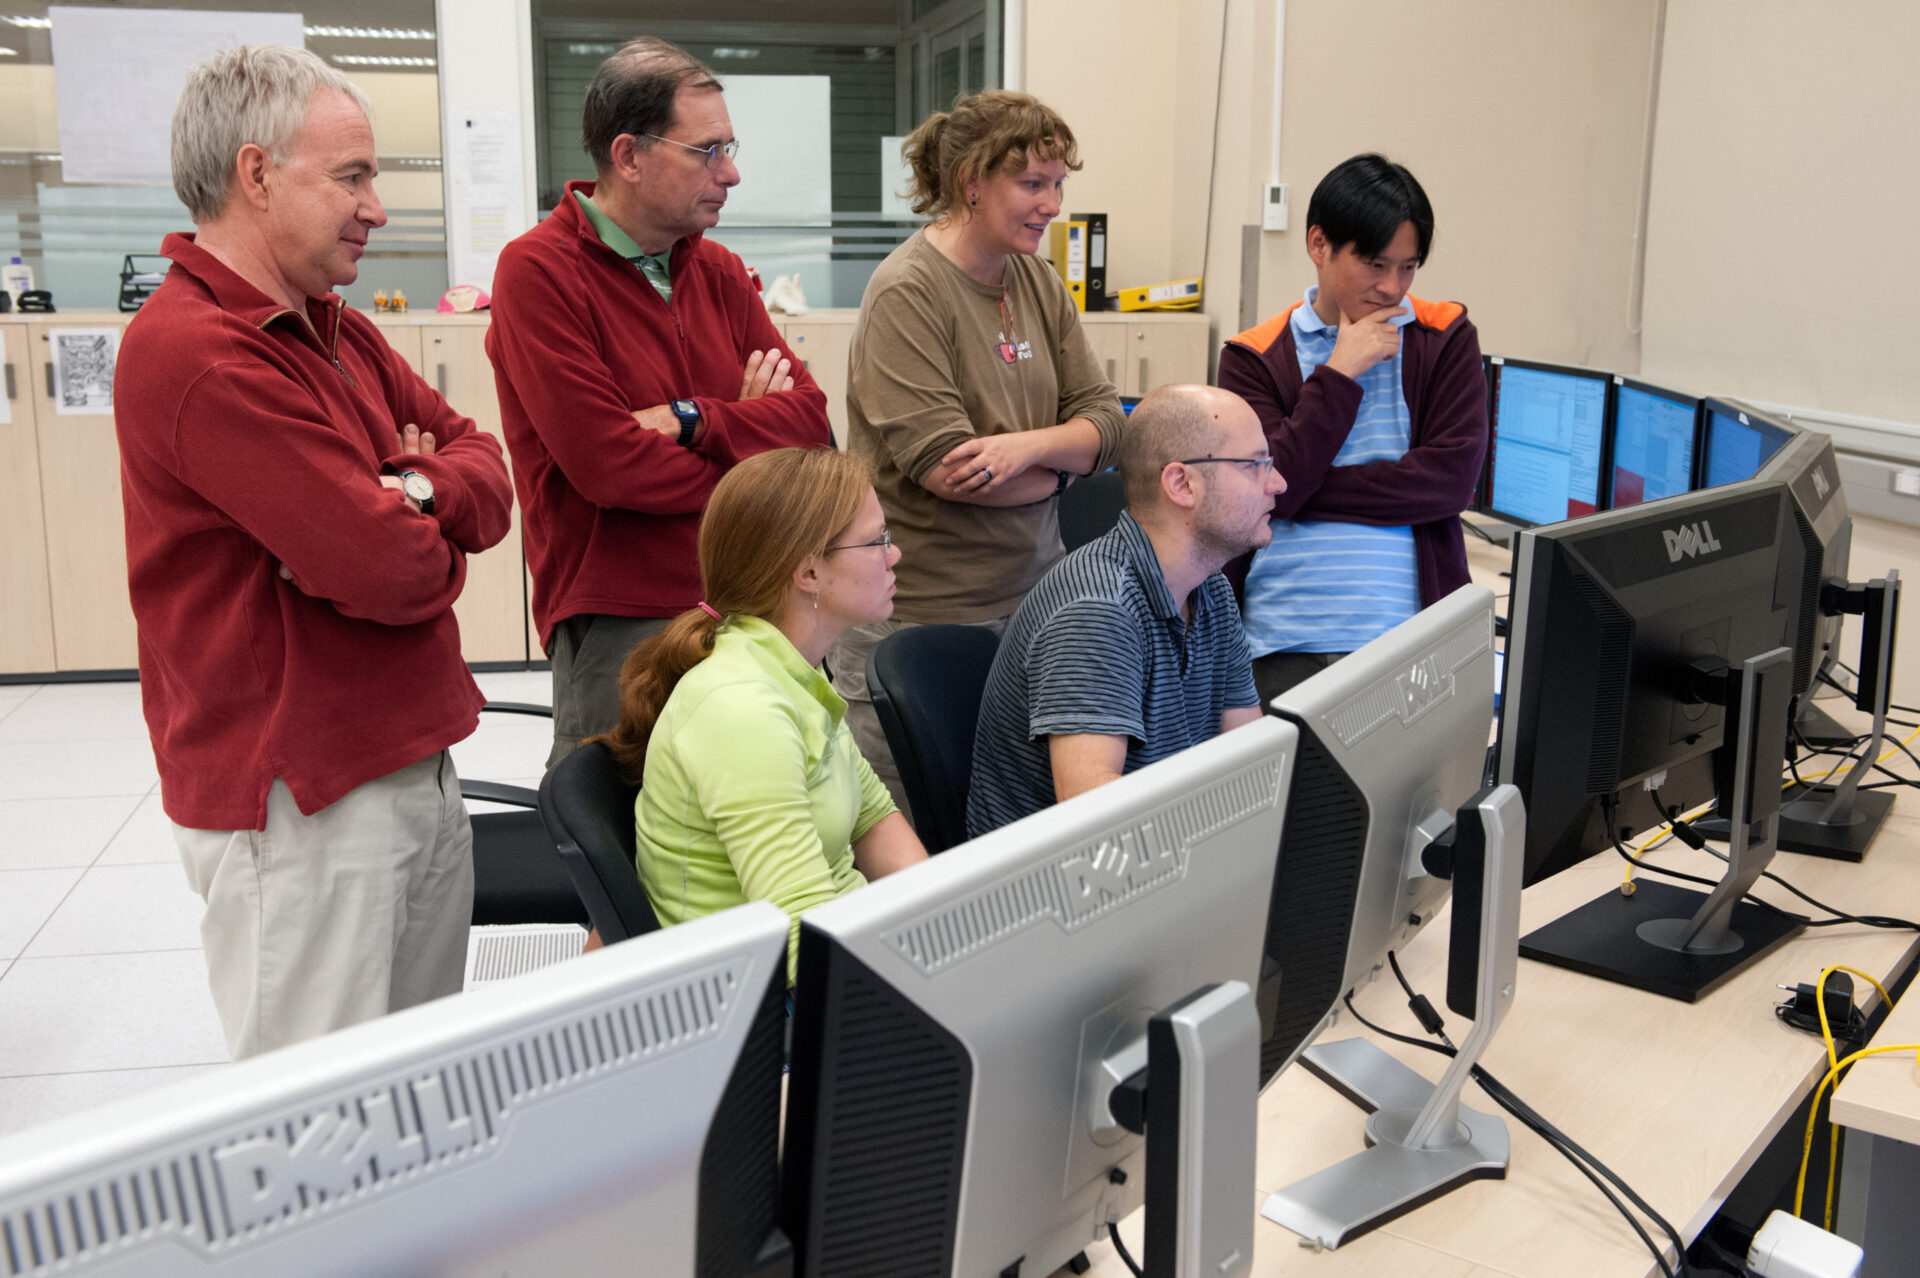 <p>OSF Control Room, AOS Console, during Antennae Array correlations. Night shift astronomers present, left to right, are: Rainer Mauersberger (ESO, Germany); Robert Lucas (ESO; France); Adele Plunkett (US, sitting); Alison Peck (US; Dep project scientist); Manuel Aravena (Chile, sitting); Mareki Honma (Japan).</p>
<p>Credit:<br />
ESO/Max Alexander</p>
